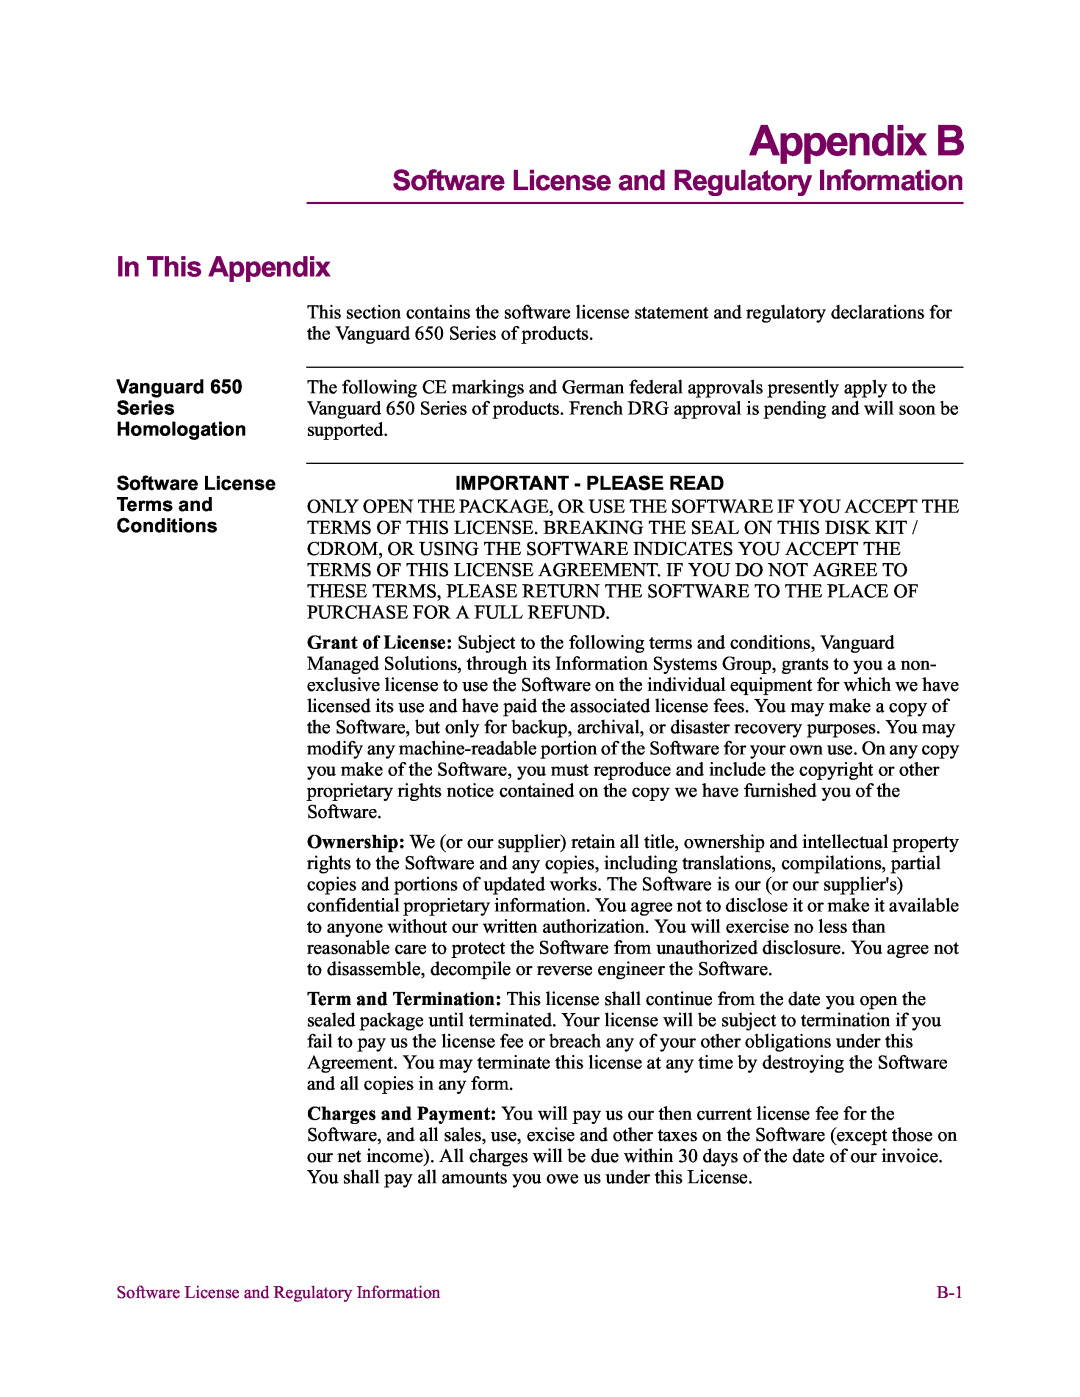 Vanguard Managed Solutions 650 Appendix B, Software License and Regulatory Information In This Appendix, Vanguard, Series 